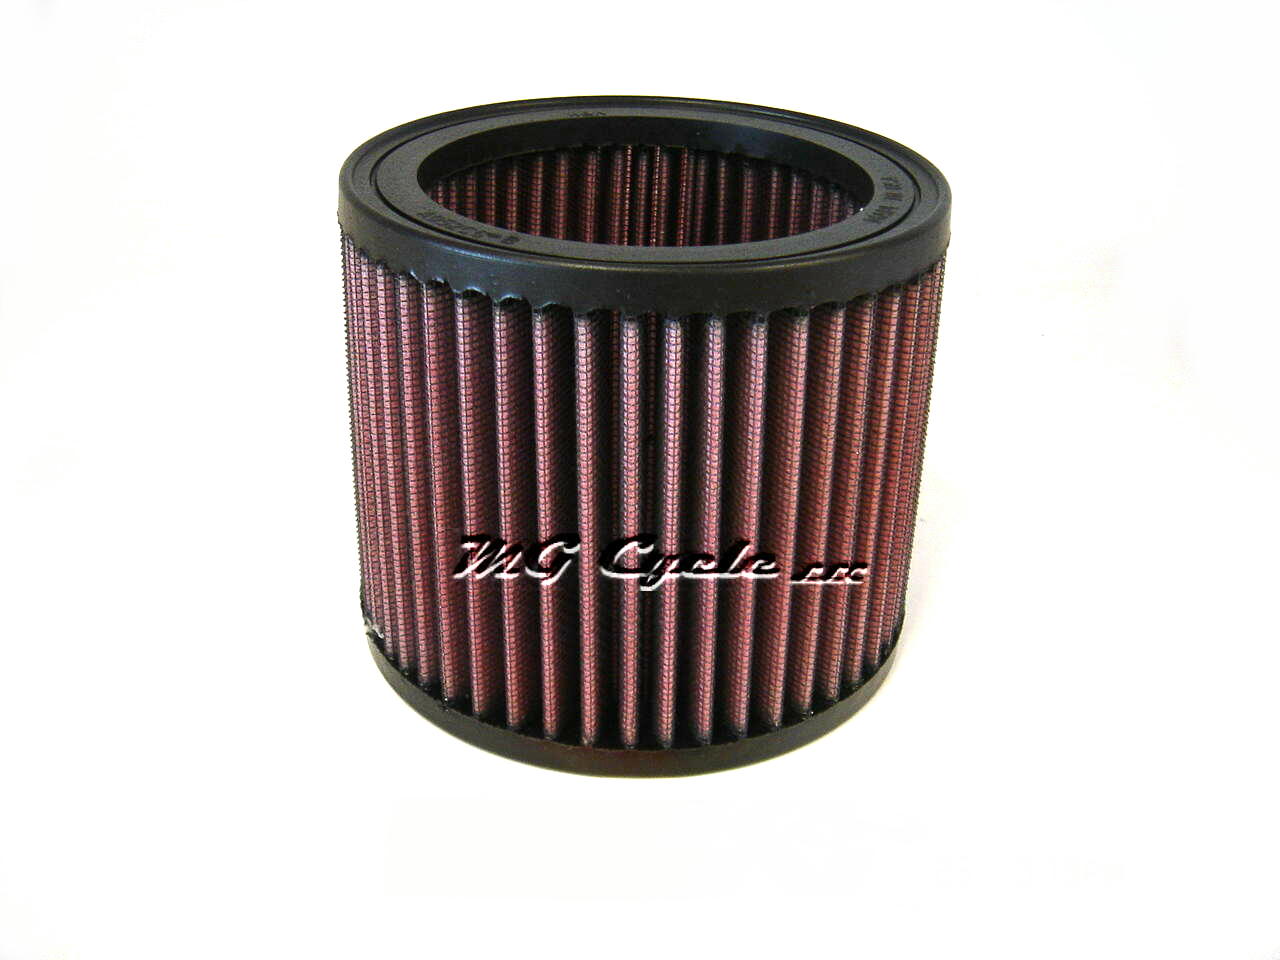 K&N air filter for Norge1200, Breva1100, 1200 Sport - Click Image to Close